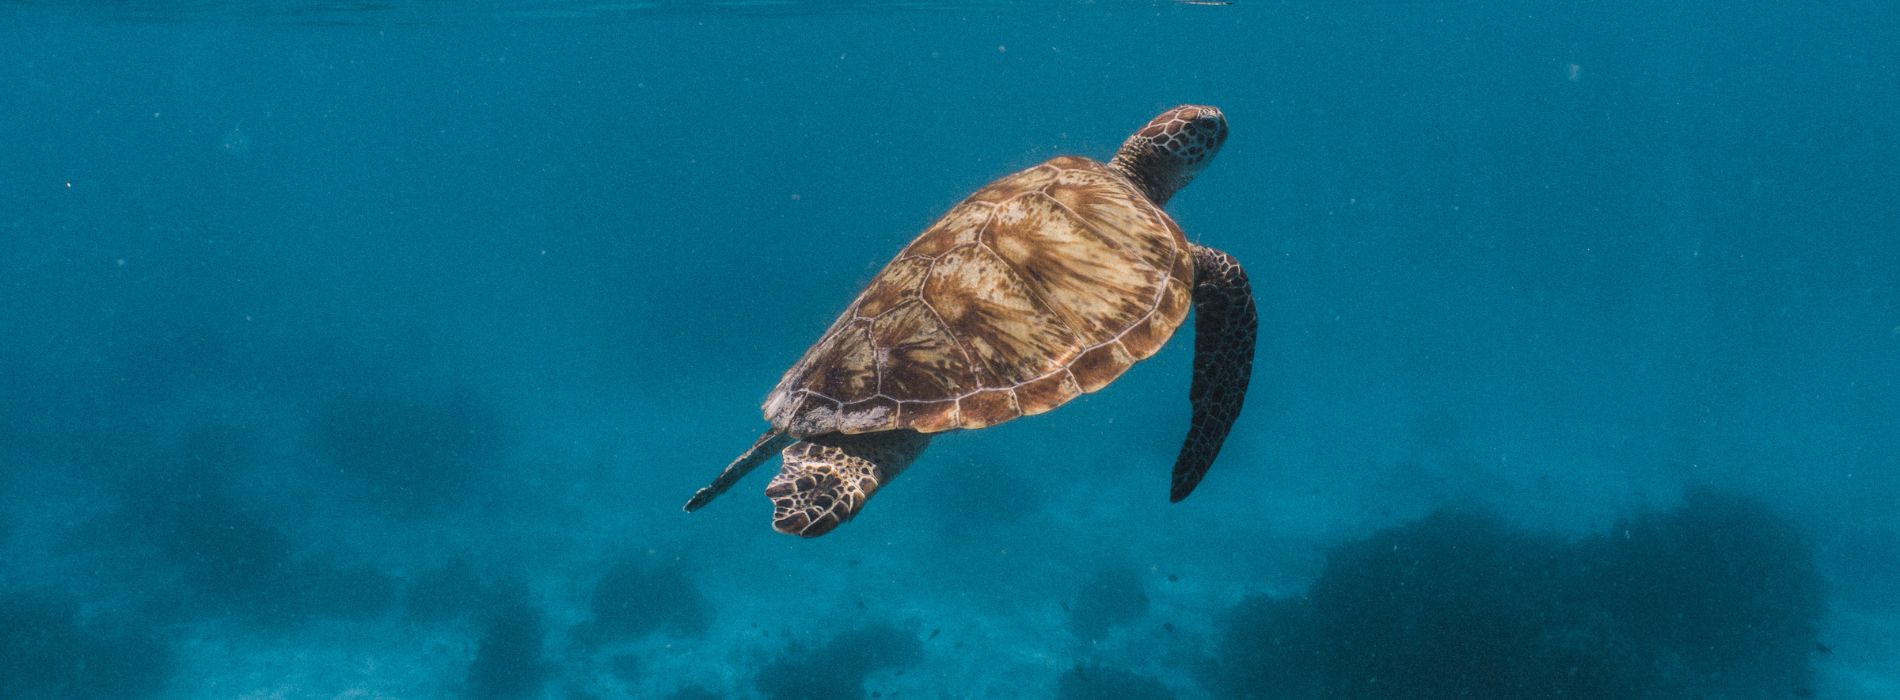 Snorkeling with Sea Turtles in Puerto Rico